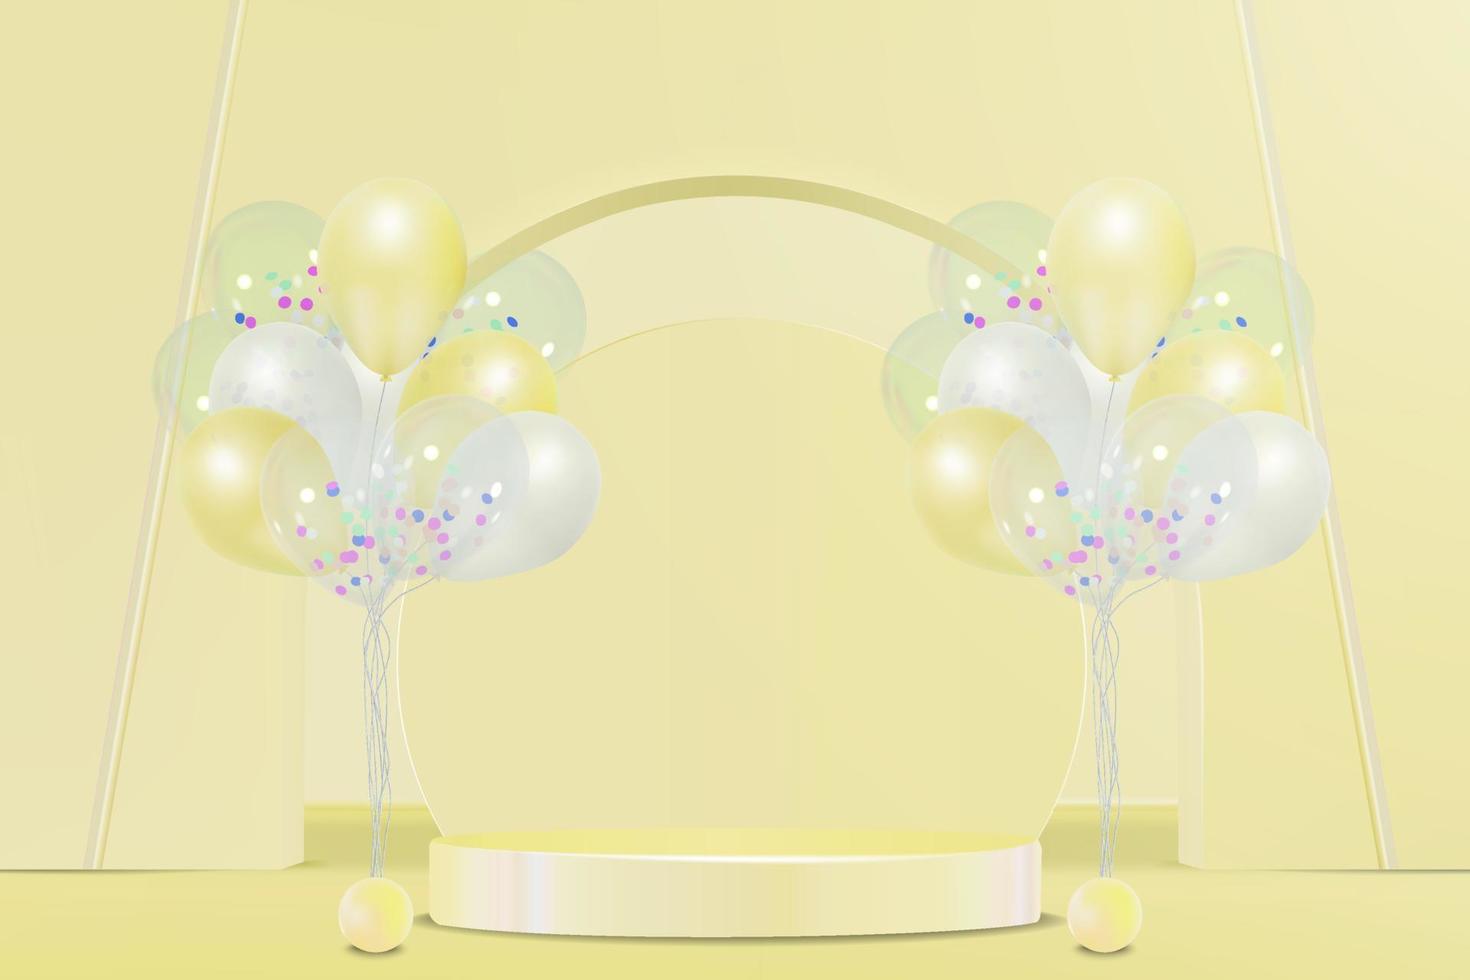 Colorful balloons with a podium stand scene vector 3d